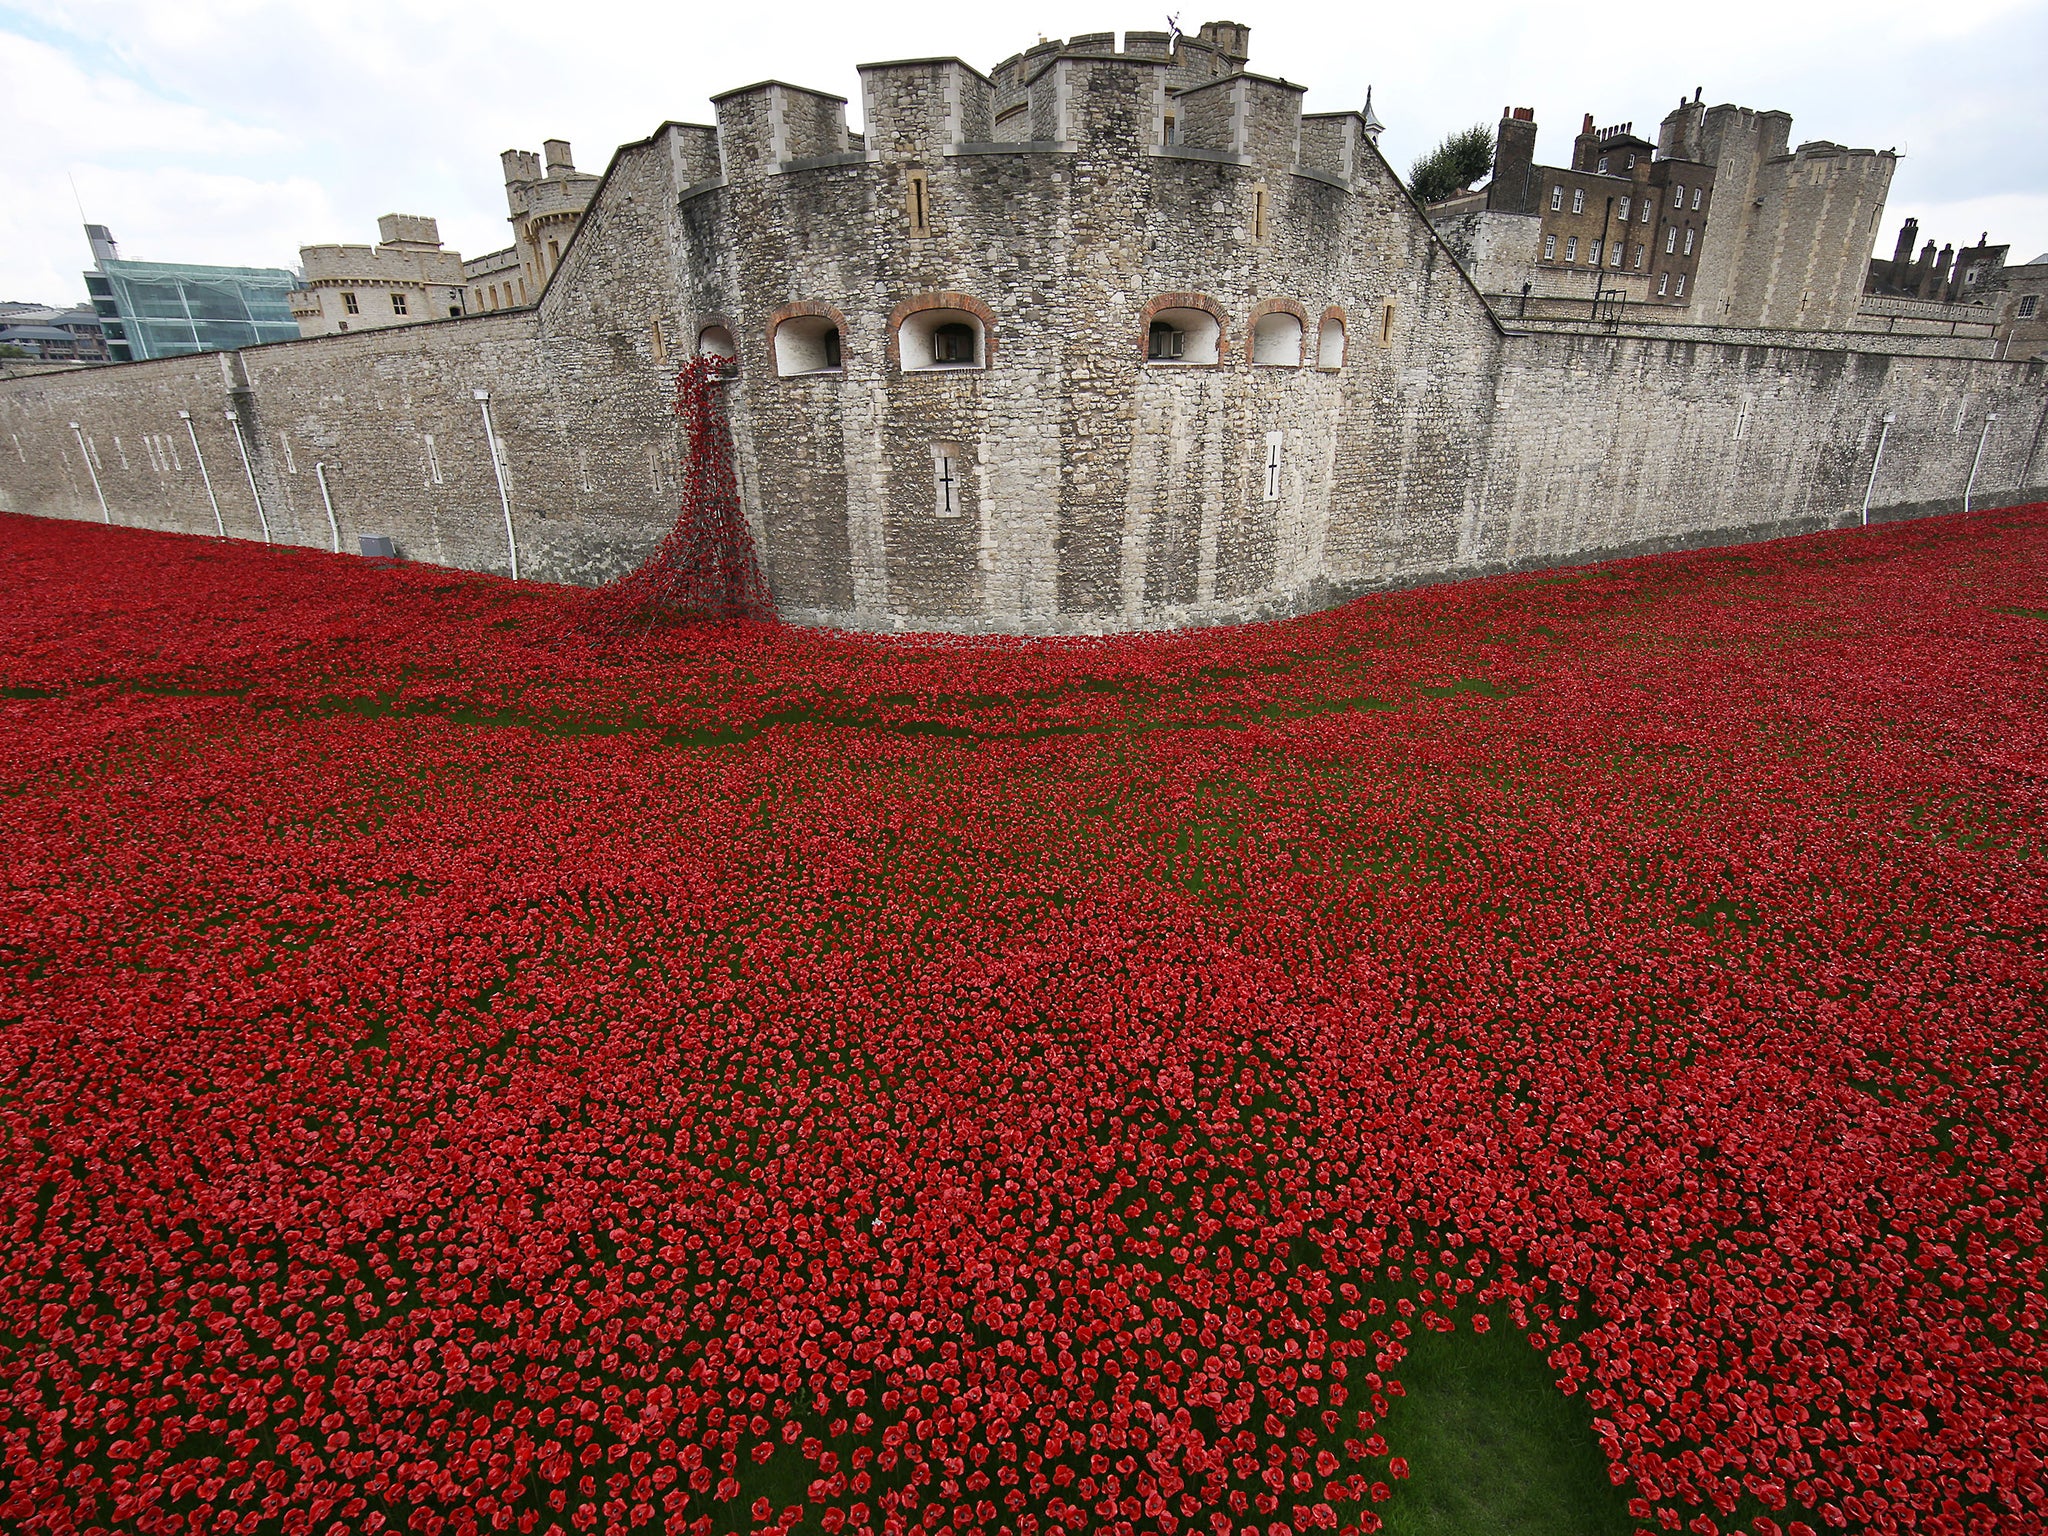 'Blood Swept Lands and Seas of Red' by artist Paul Cummins, made up of 888,246 ceramic poppies fills the moat of the Tower of London, to commemorate the First World War